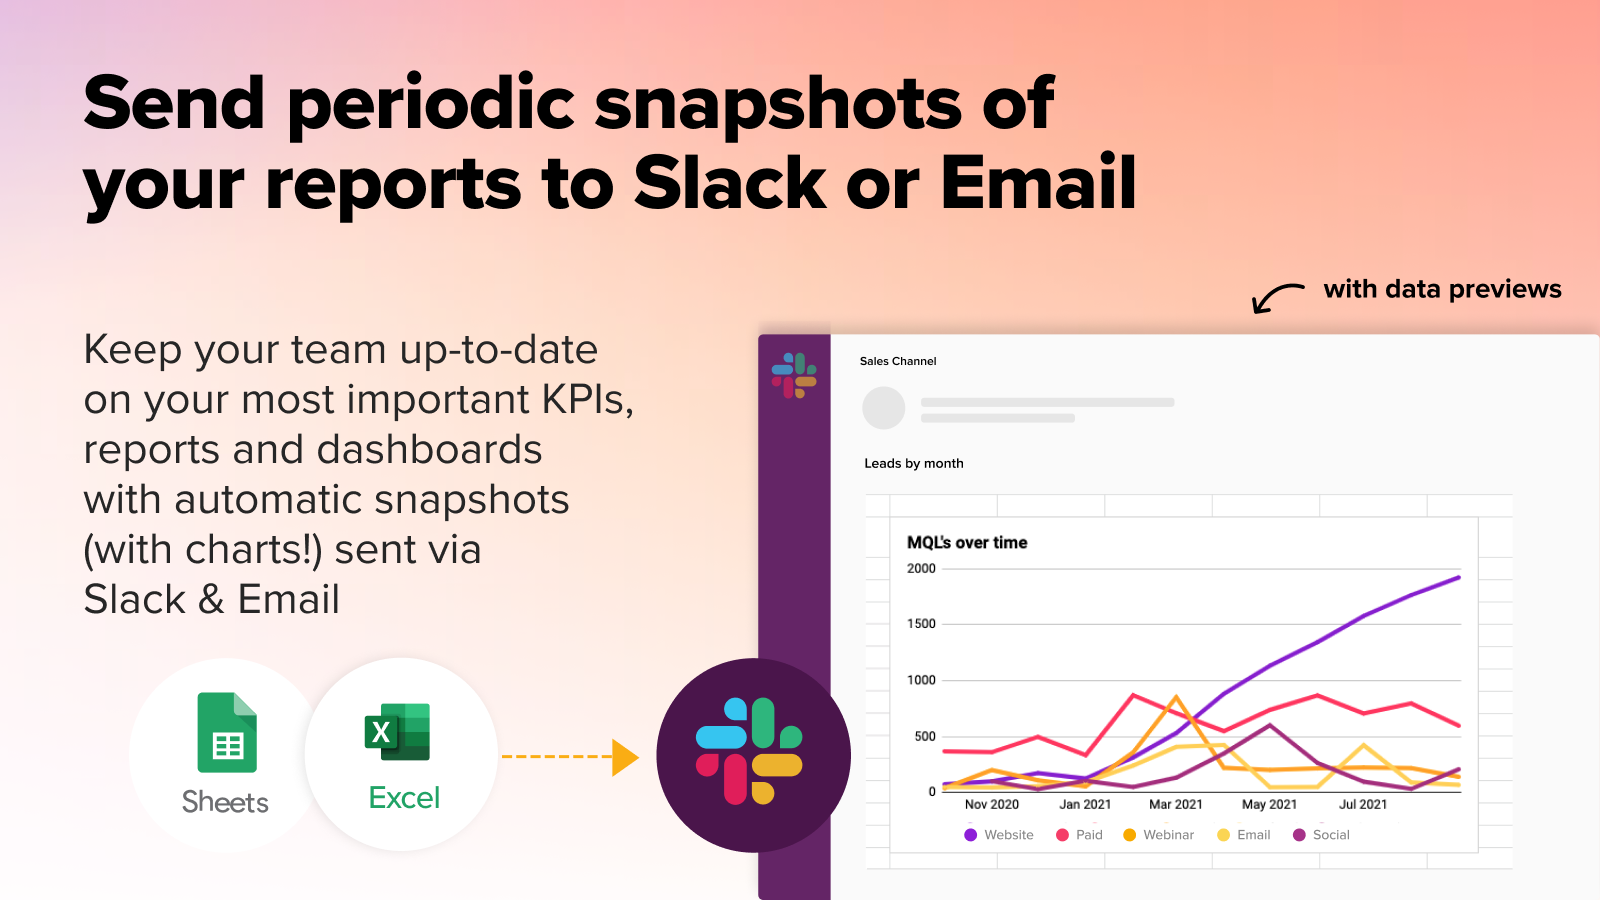 Send periodic snapshots of your reports to Slack or Email